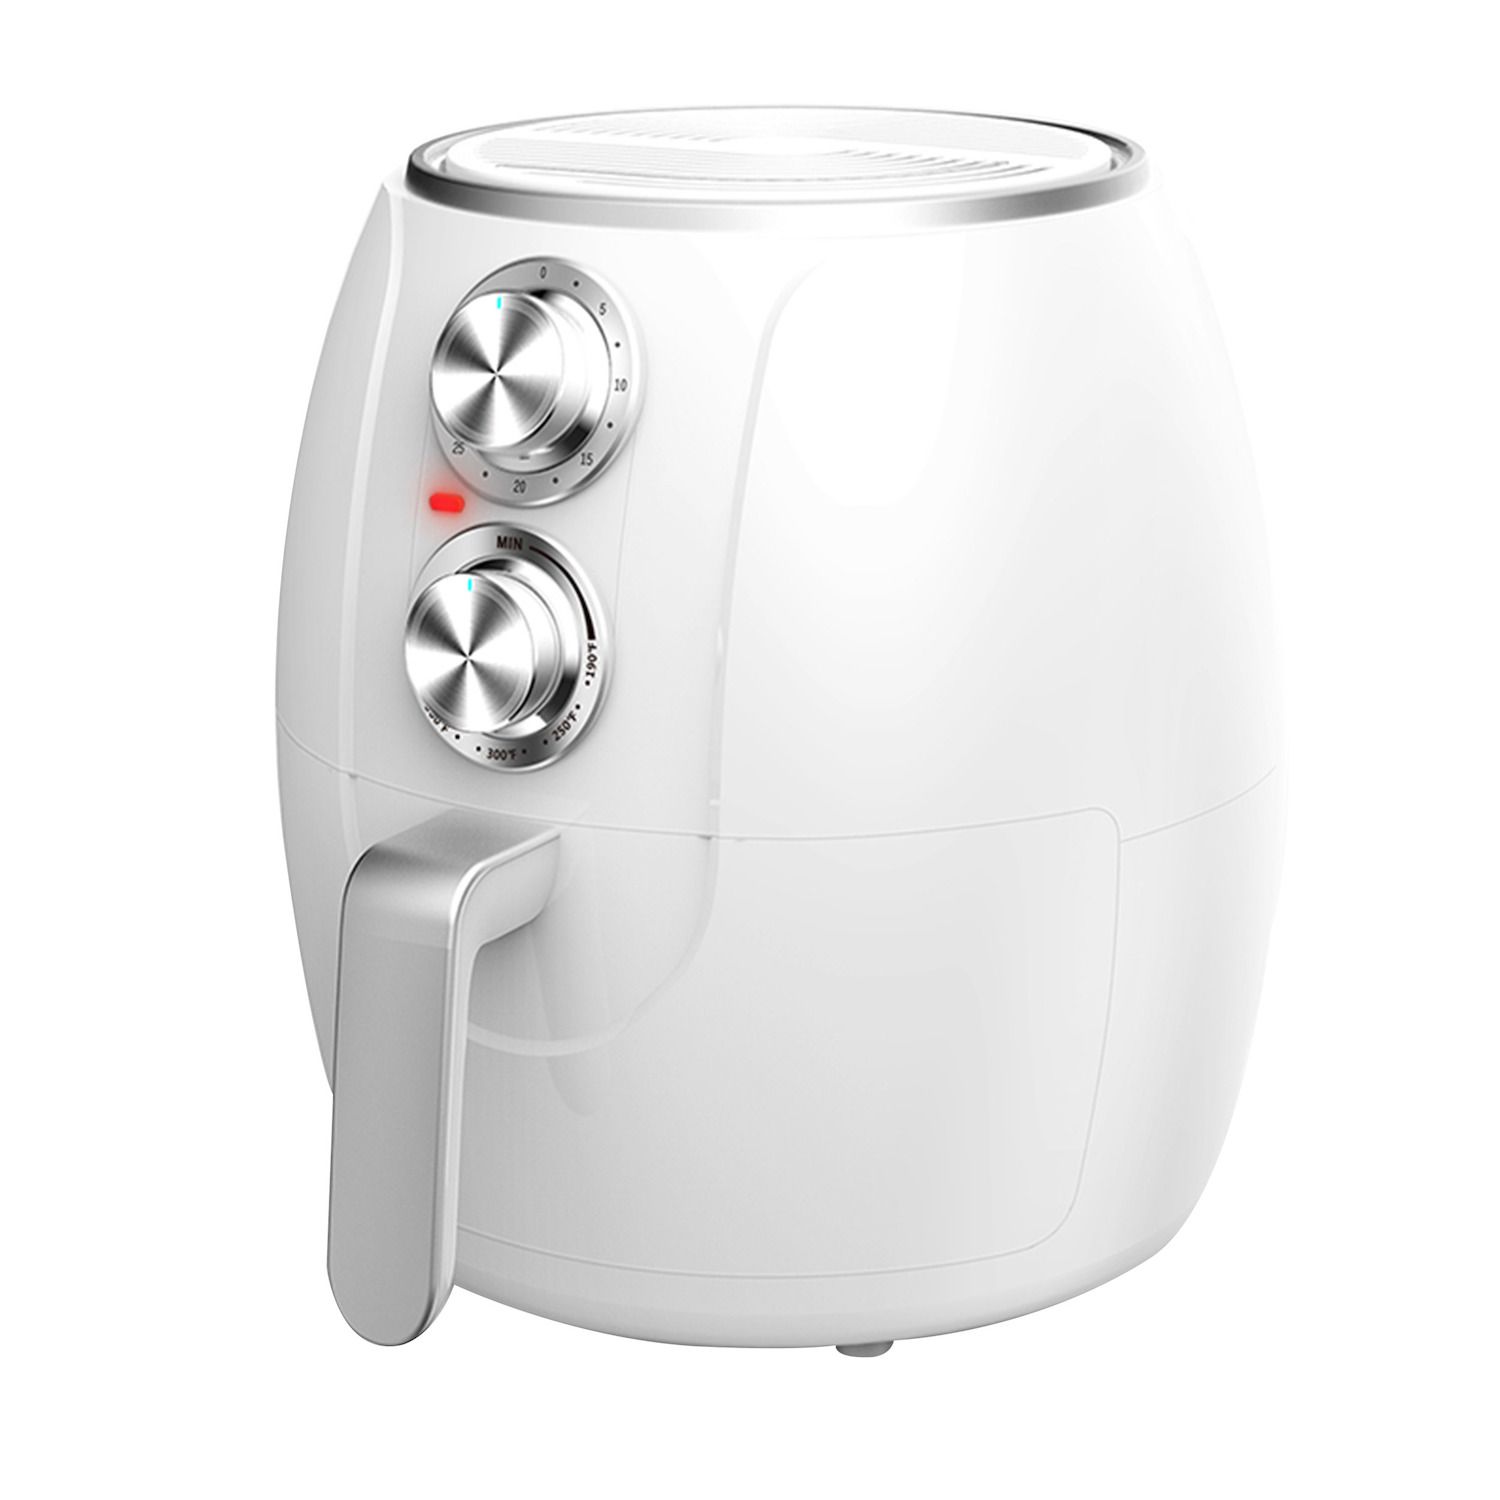 Bennett Read 9L Dual Air Fryer KAF140 for Sale ✔️ Lowest Price Guaranteed